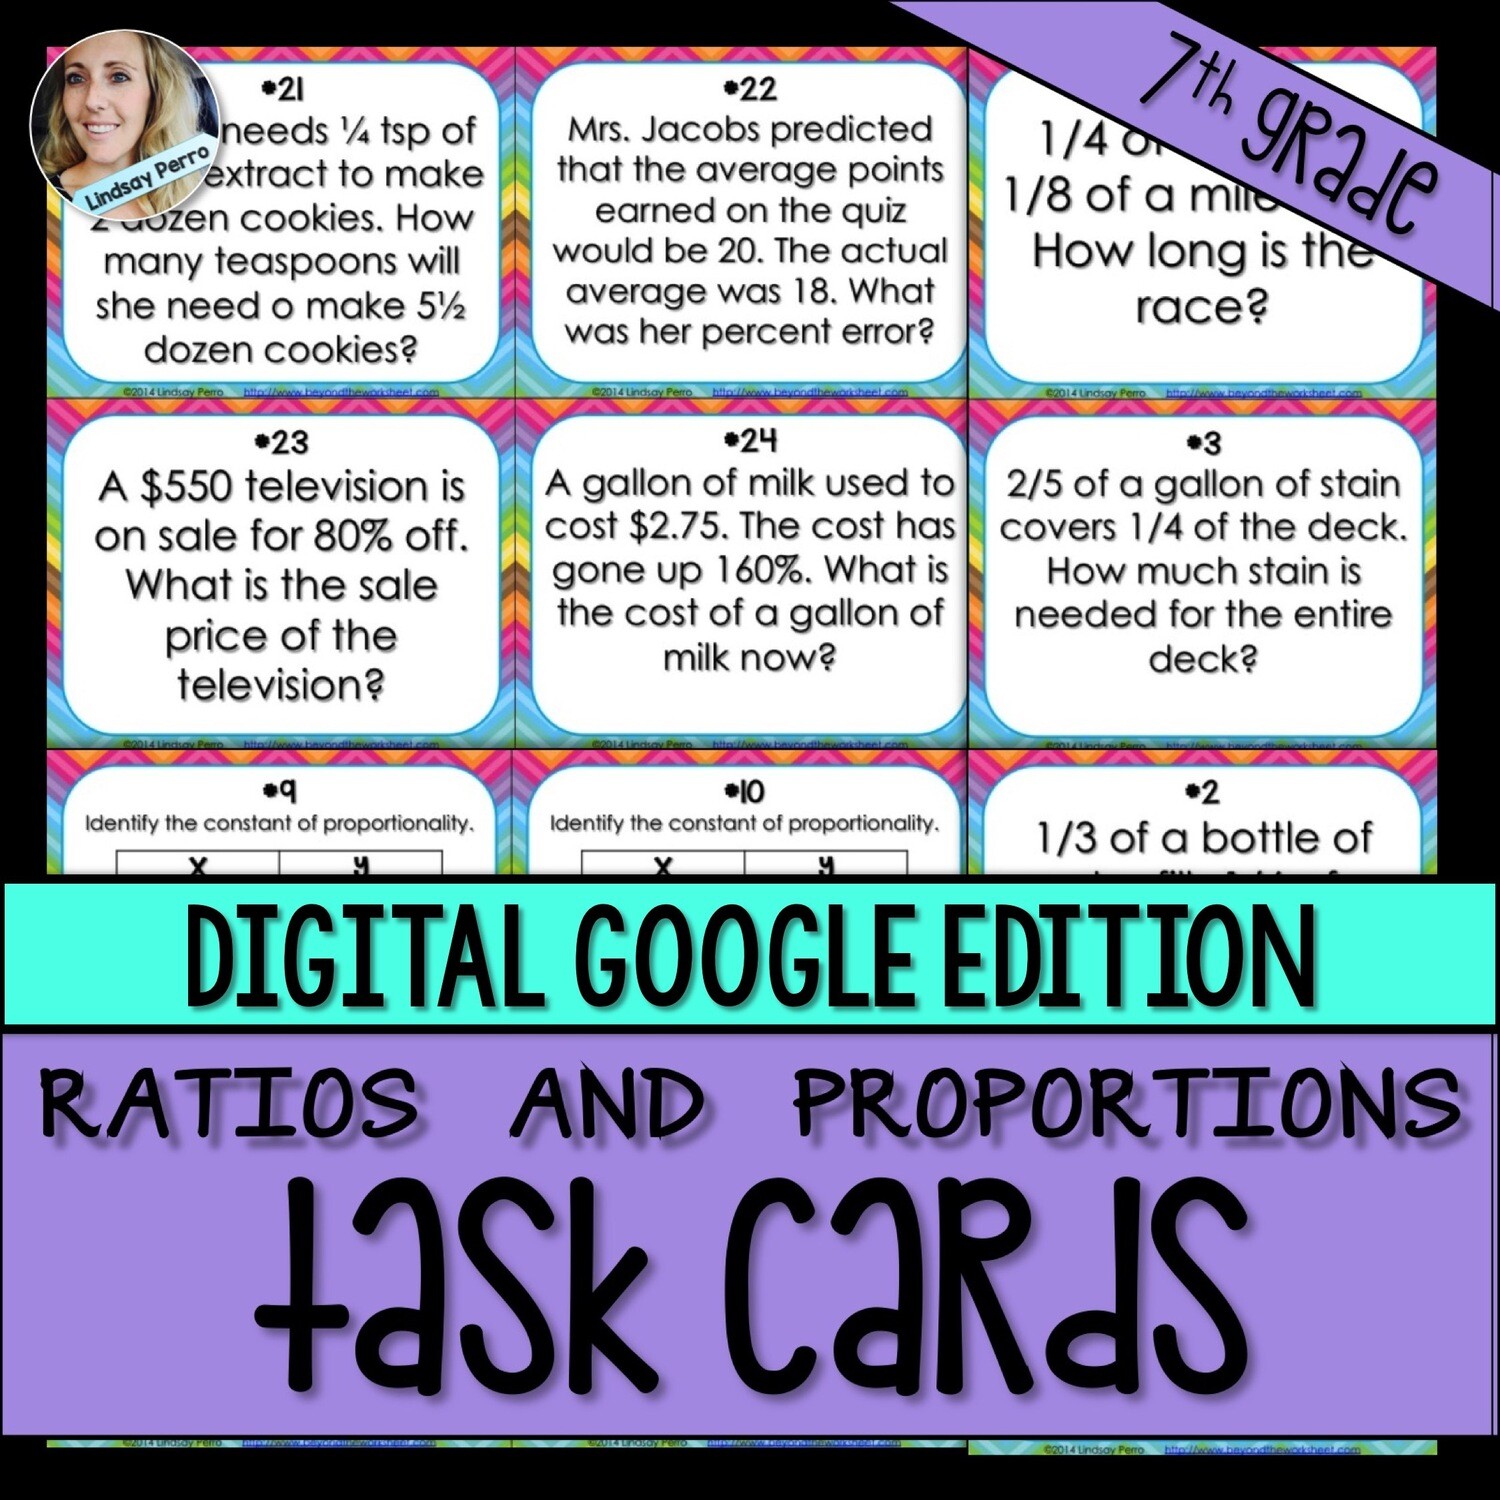 Ratios and Proportional Relationships Task Cards - GOOGLE EDITION